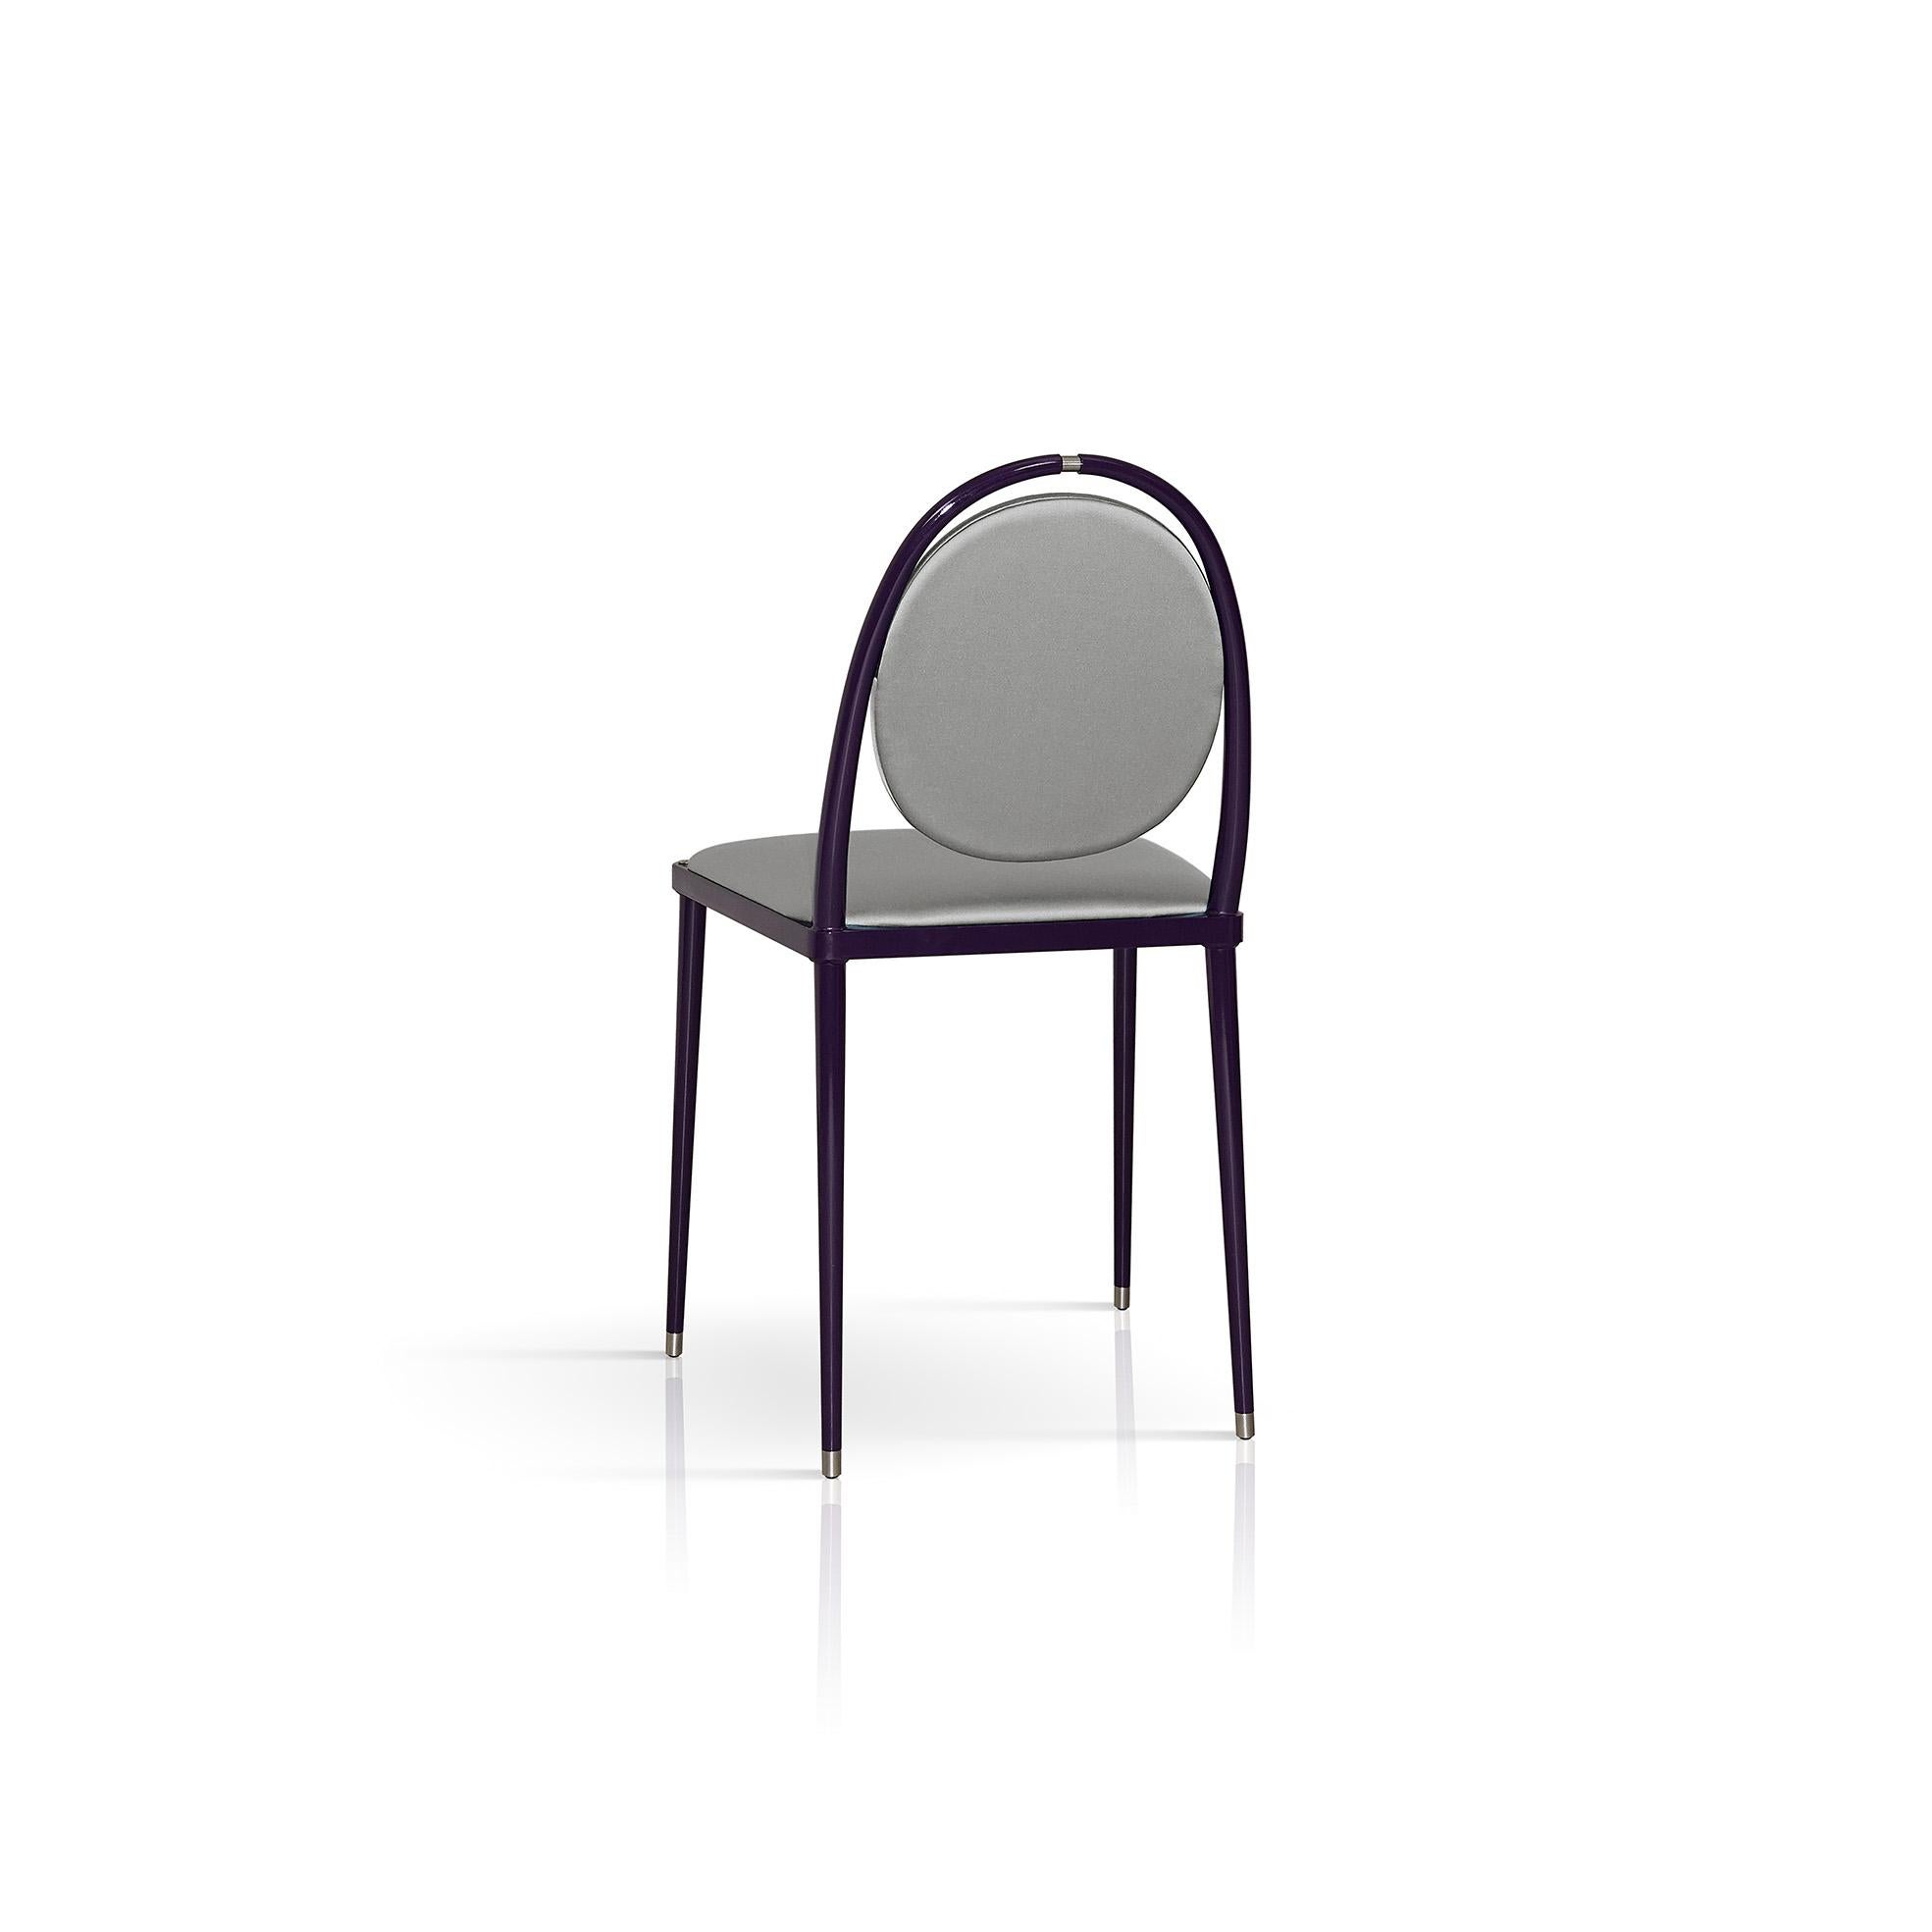 This chair combines simplicity, perfection, and elegance in a simple geometry made of curves and straight lines inspired by primary shapes and colors. Built on a metal frame with slender legs, the glossy purple finish complements the silver silk